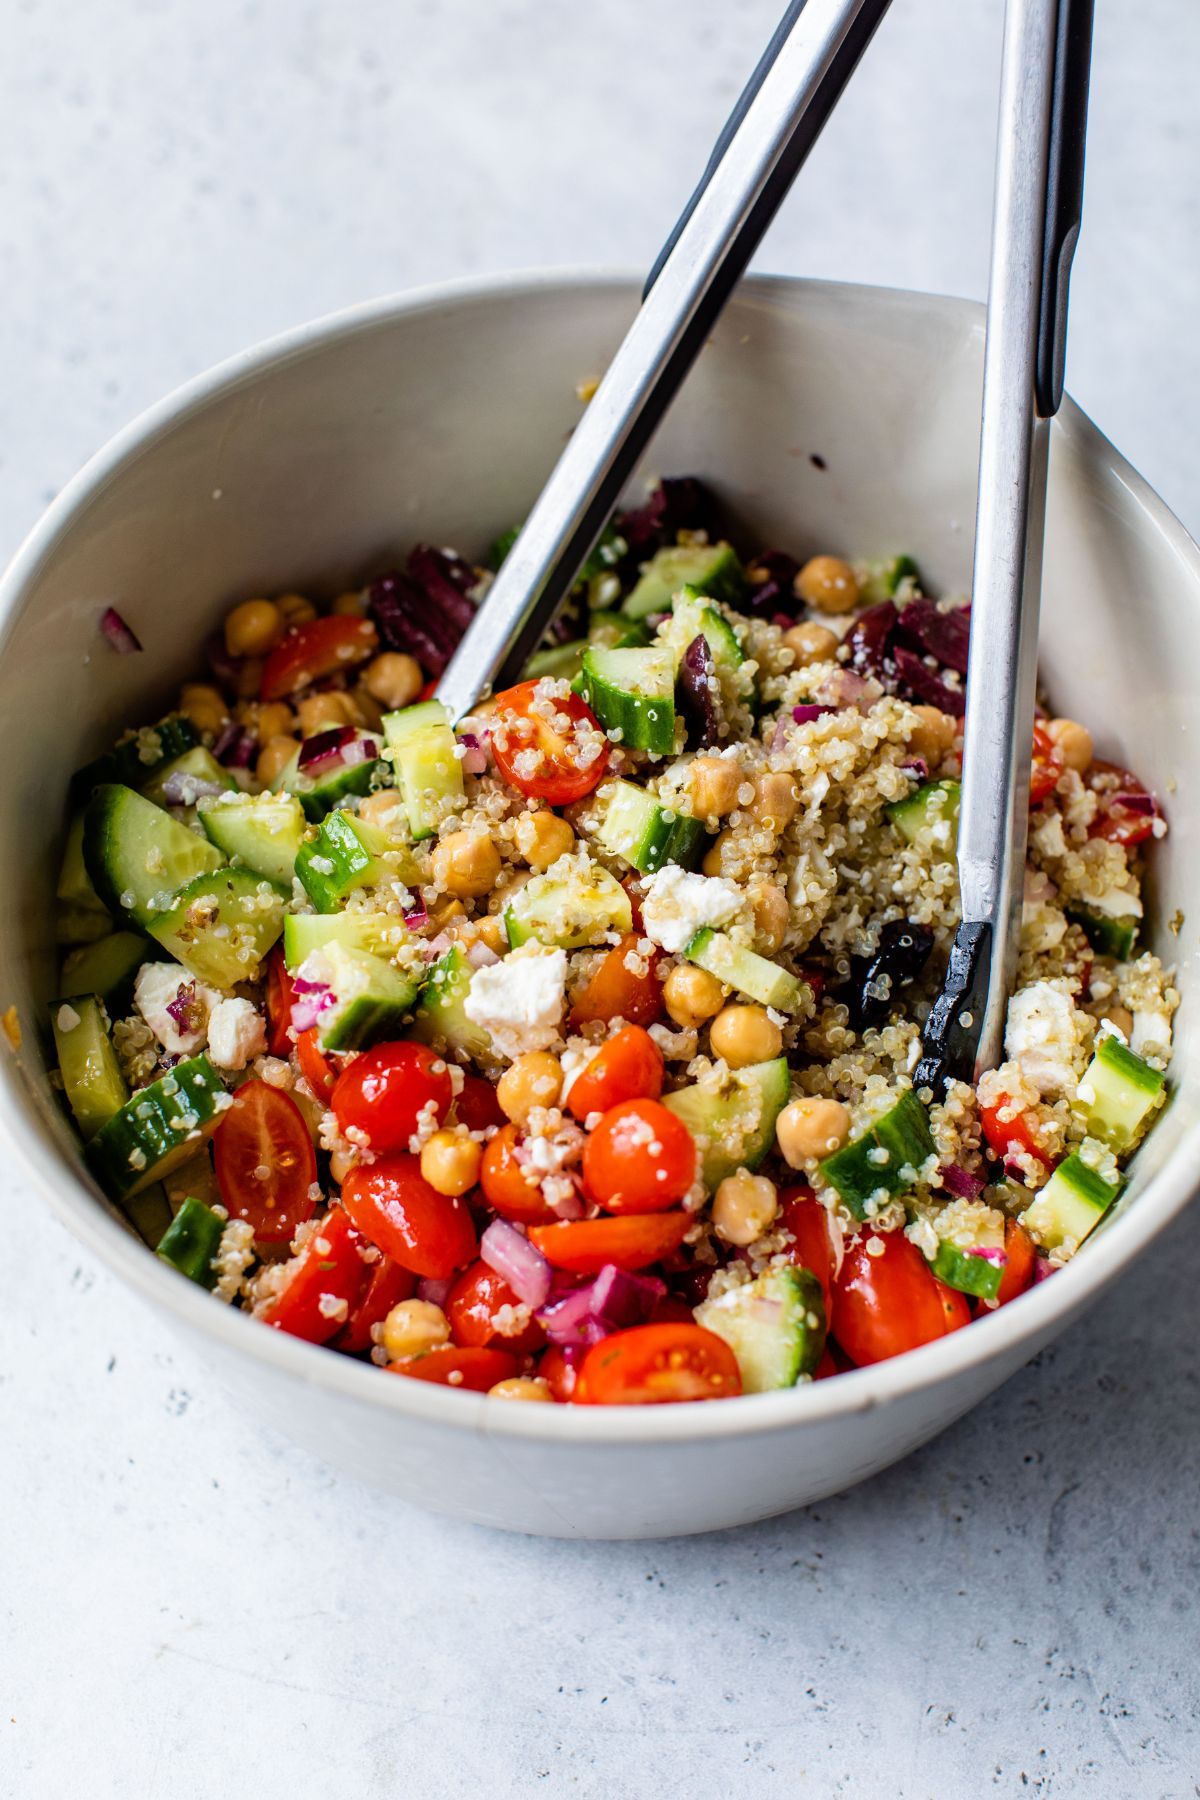 Tossing together veggies with quinoa and dressing in a large bowl.